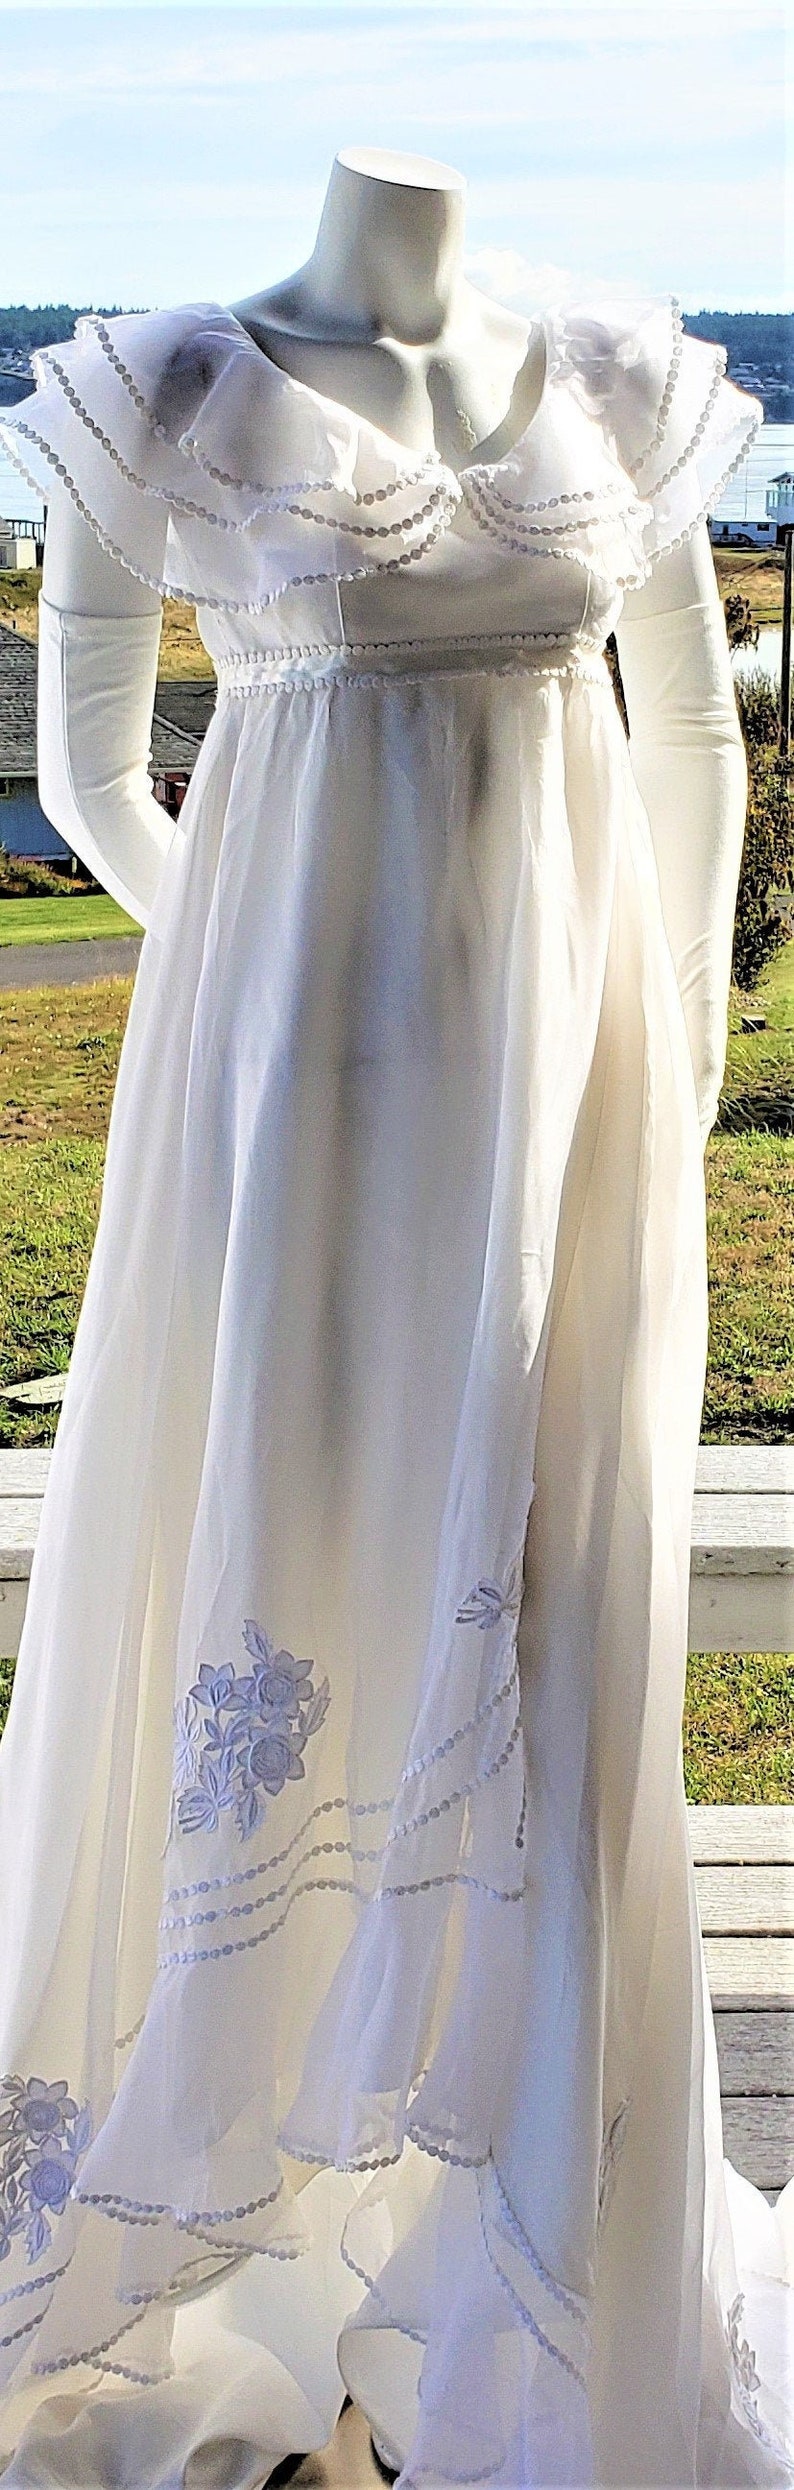 4 to 6 1940s Style White Chiffon Empire Waist Wedding Dress with Chapel Train 1960s Vintage Size Small